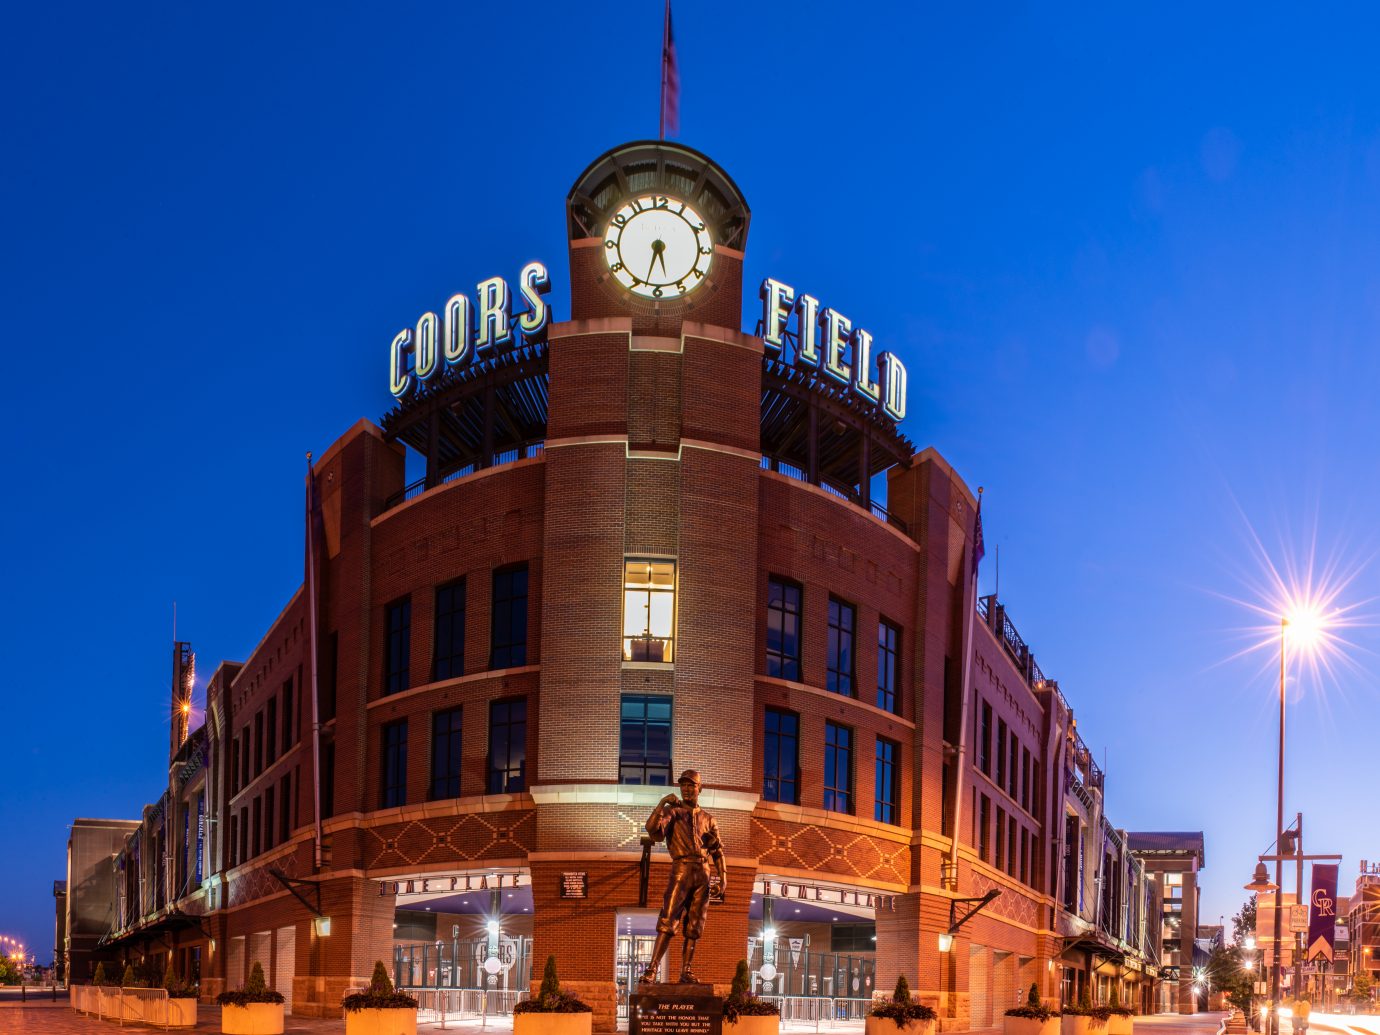 Coors Field, home of the Colorado Rockies baseball team, showing the glowing lights and vintage brick design in the early hours of a summer dawn on August 9, 2018 in Lodo, Denver.